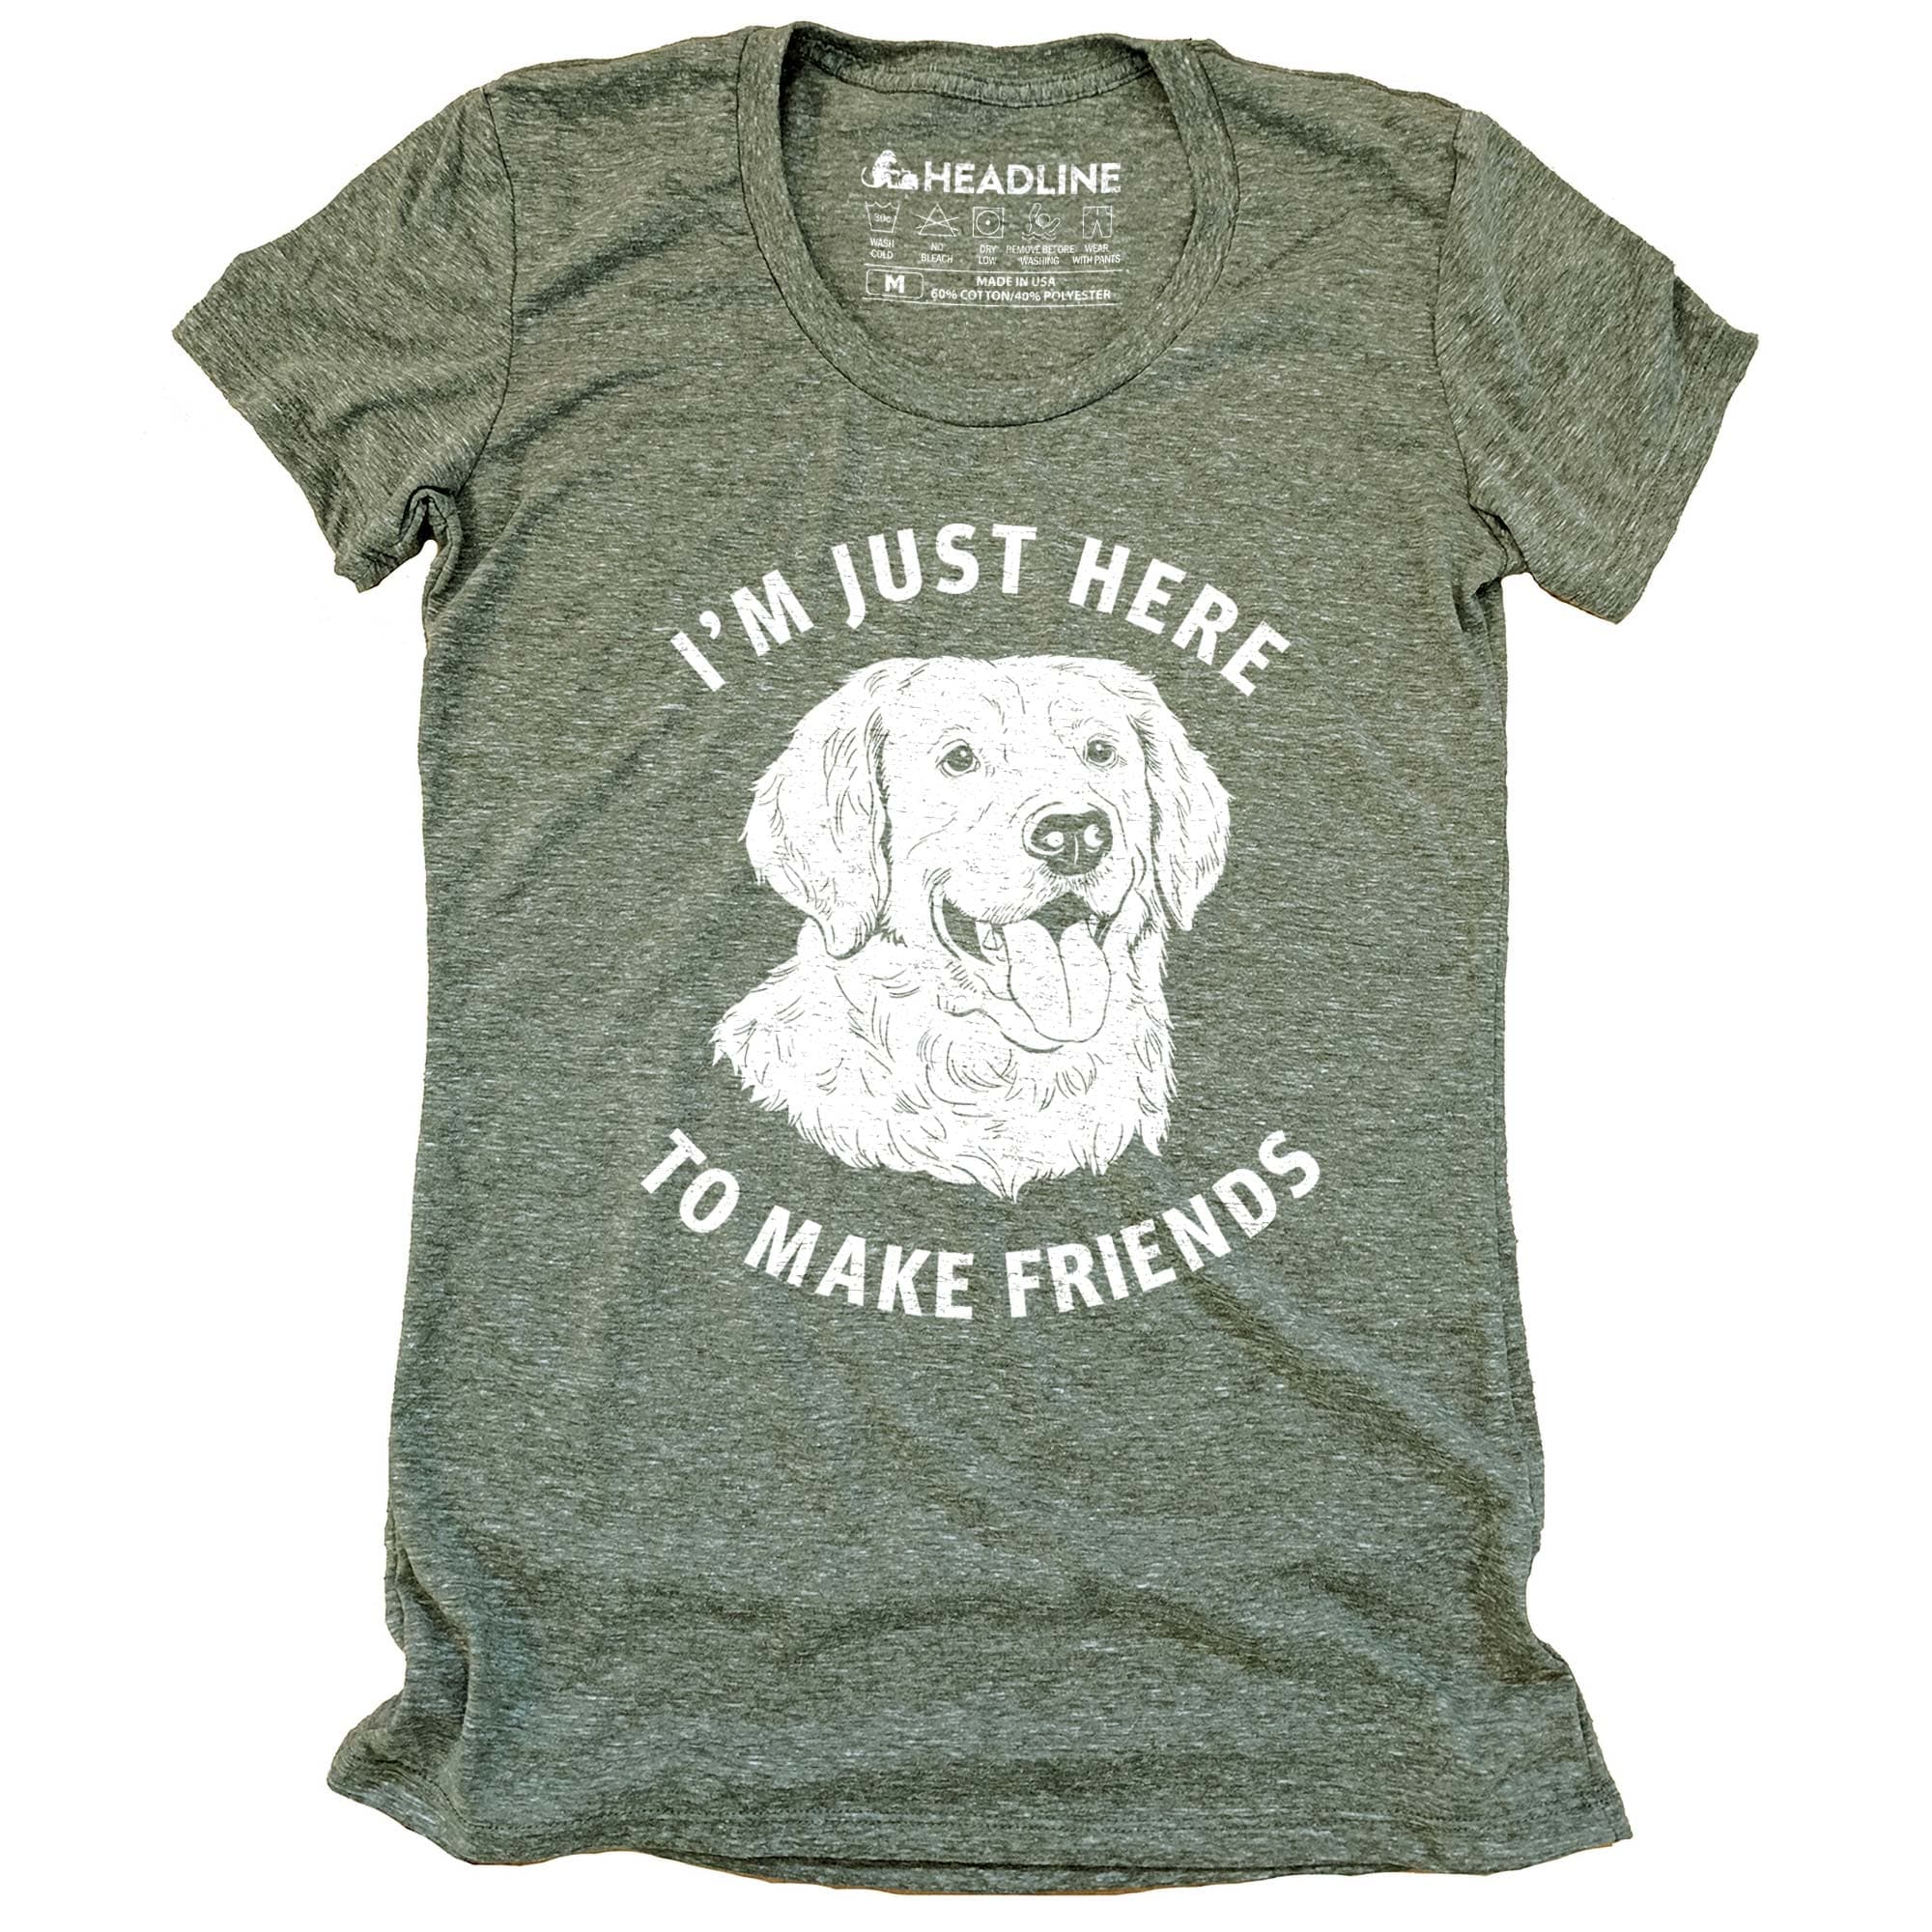 Women's Just Here To Make Friends Funny Graphic T-Shirt | Vintage Golden Retriever Tee | Solid Threads